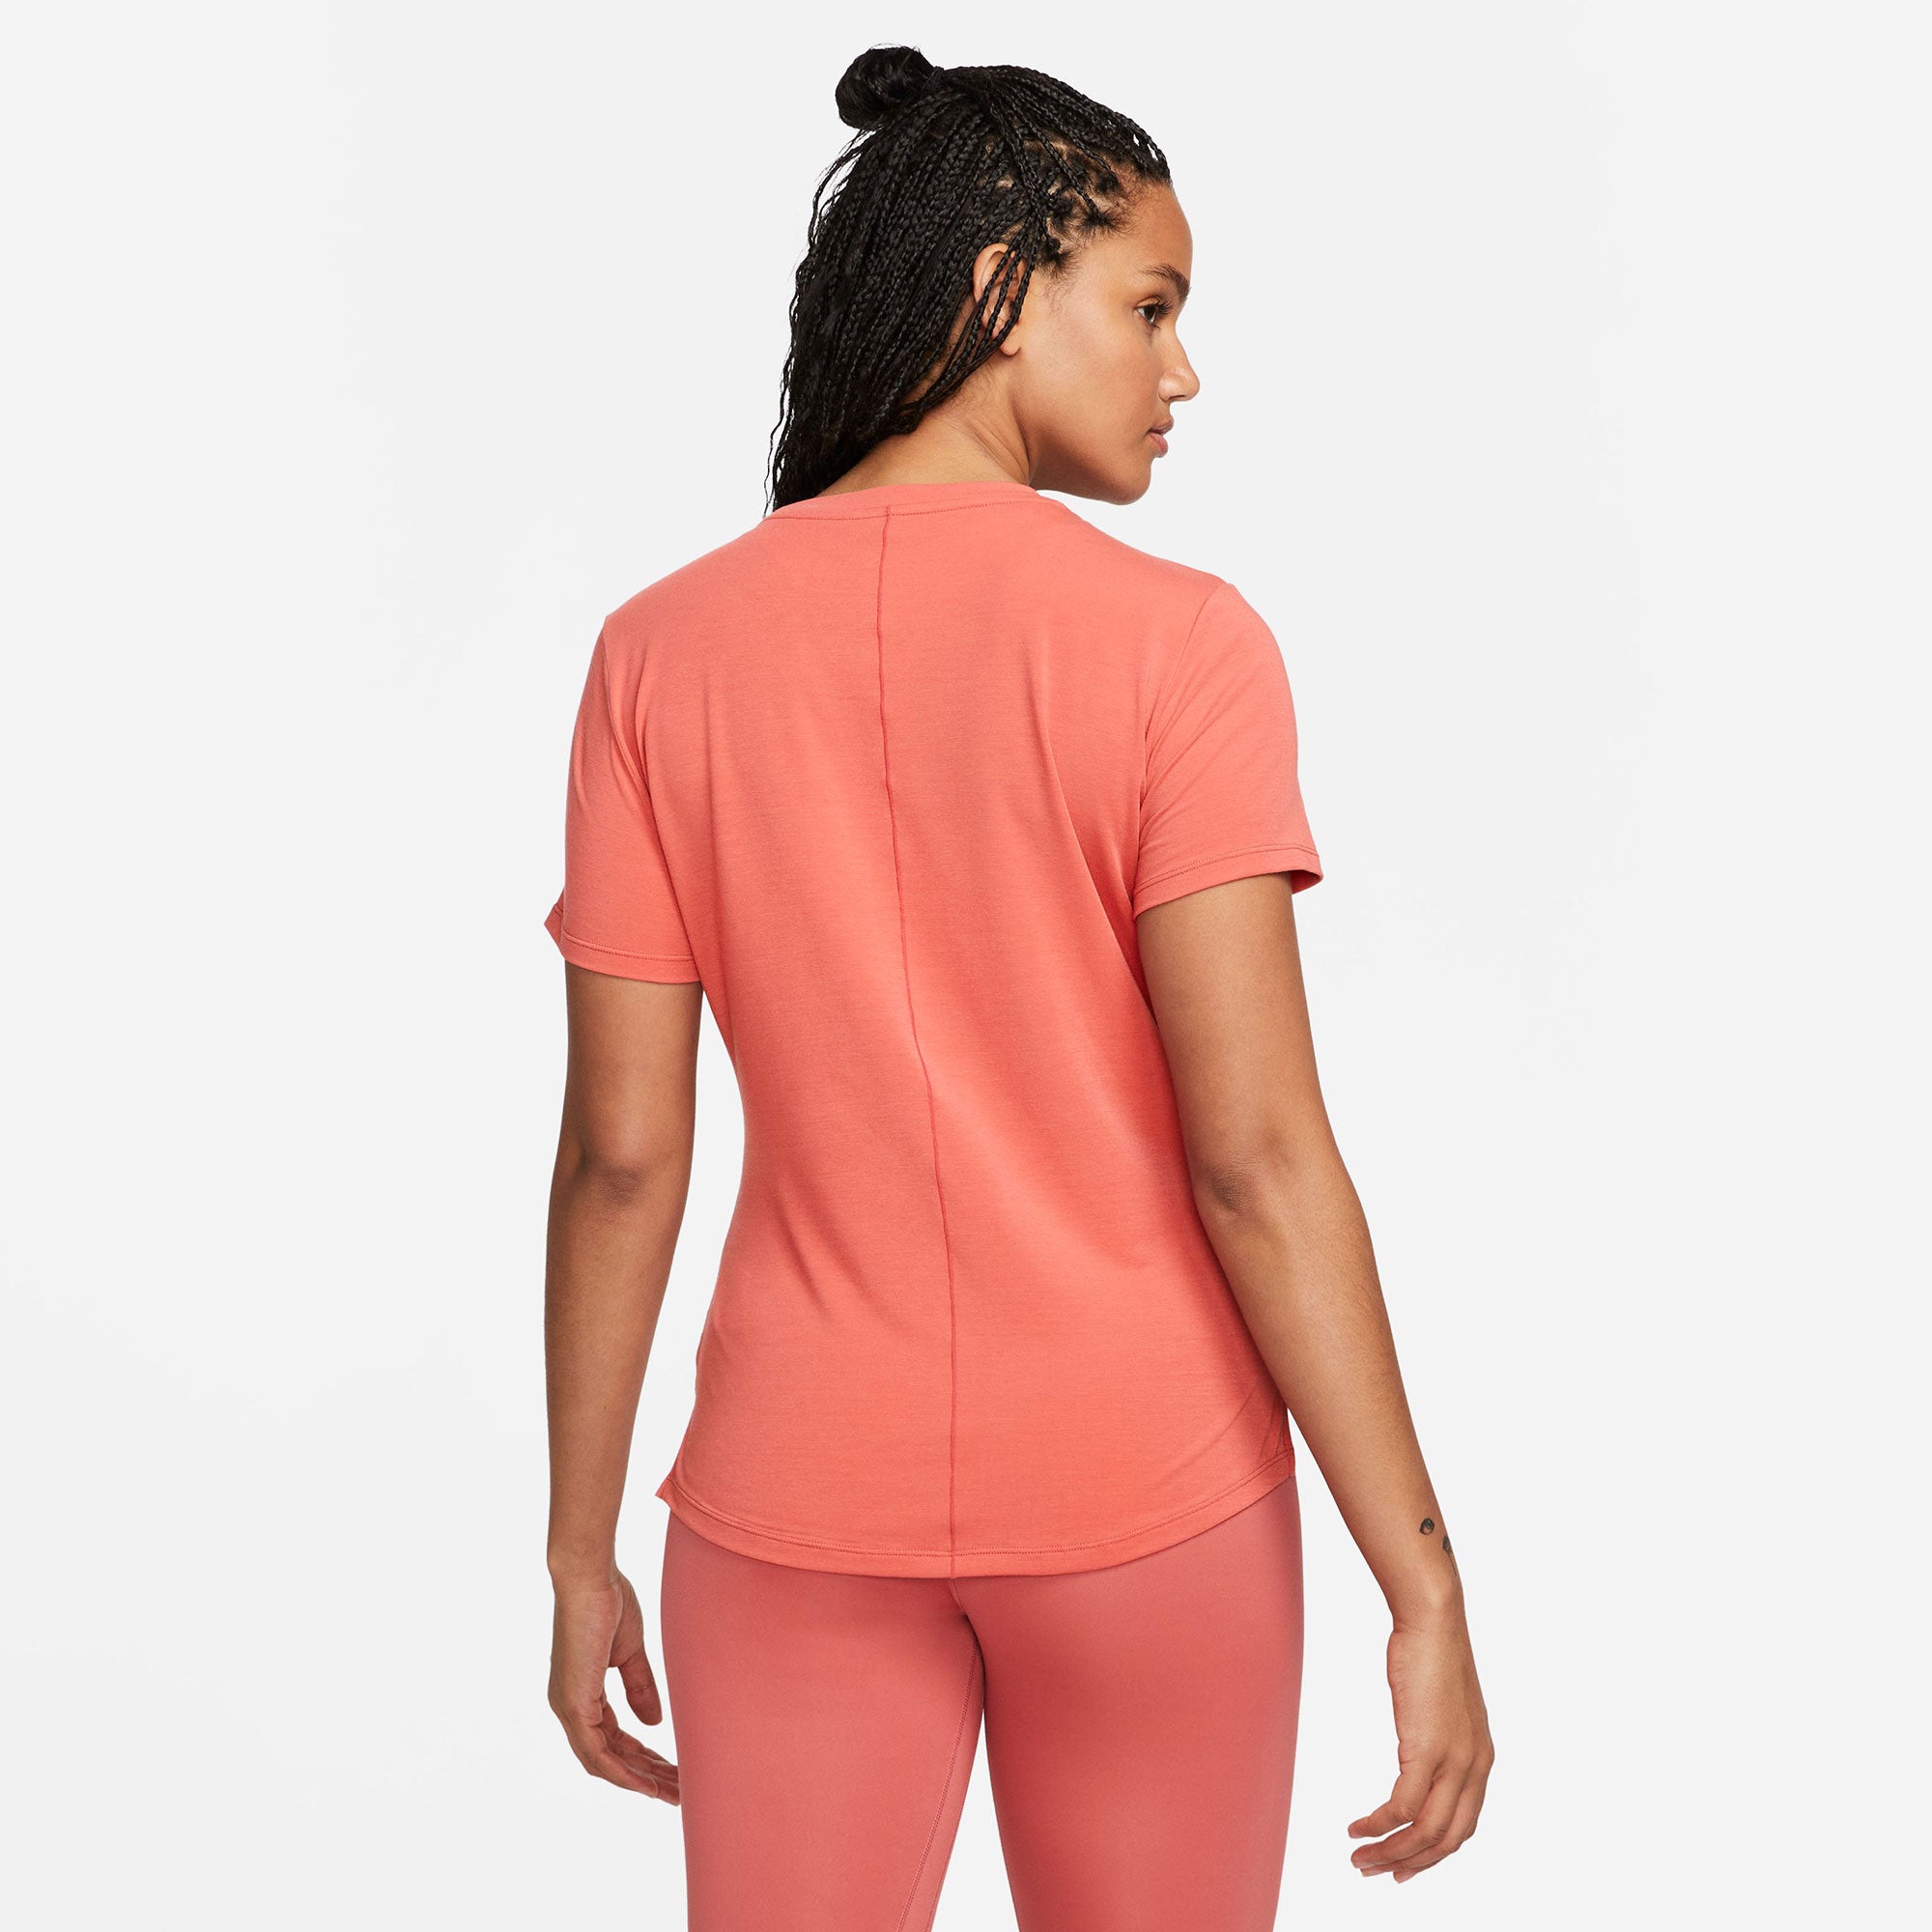 Nike One Luxe Dri-FIT Women's Standard Fit Shirt Red (2)